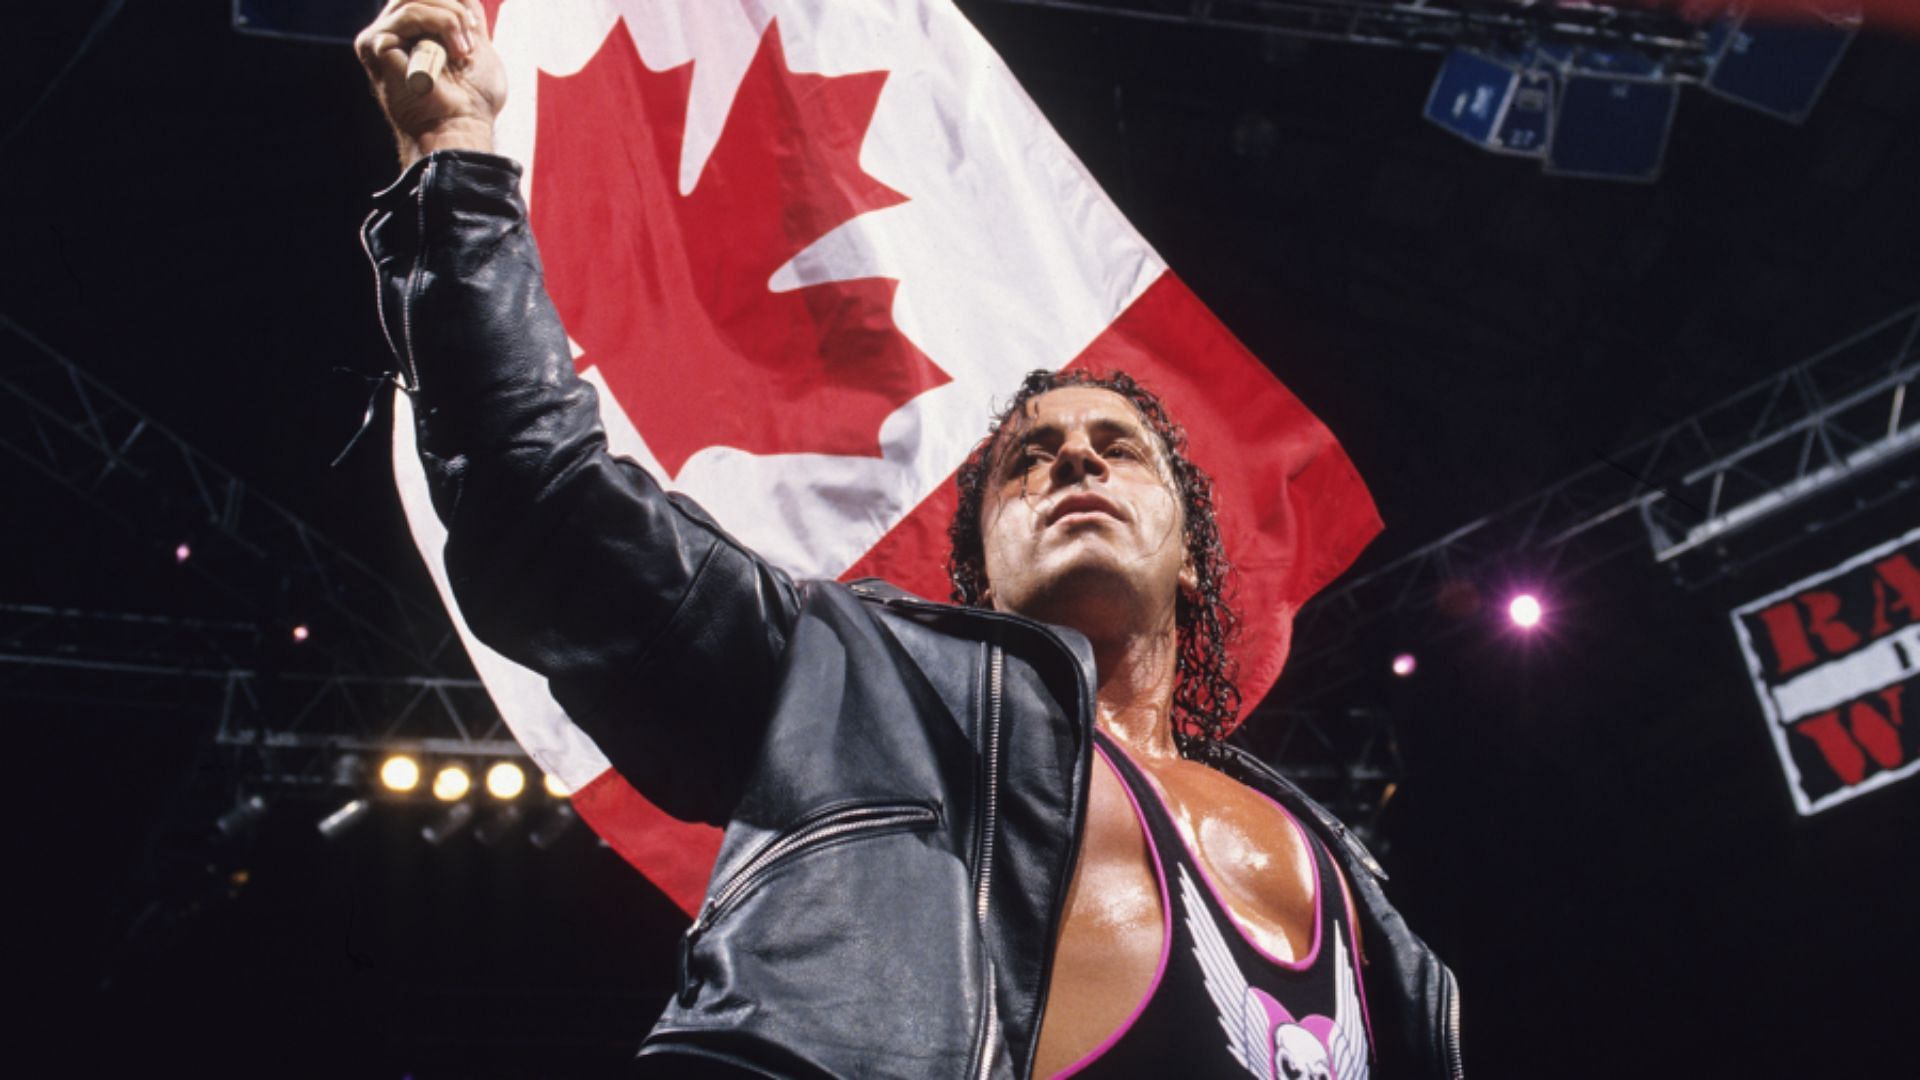 Bret Hart is a five-time WWE Champion and two-time Hall of Famer